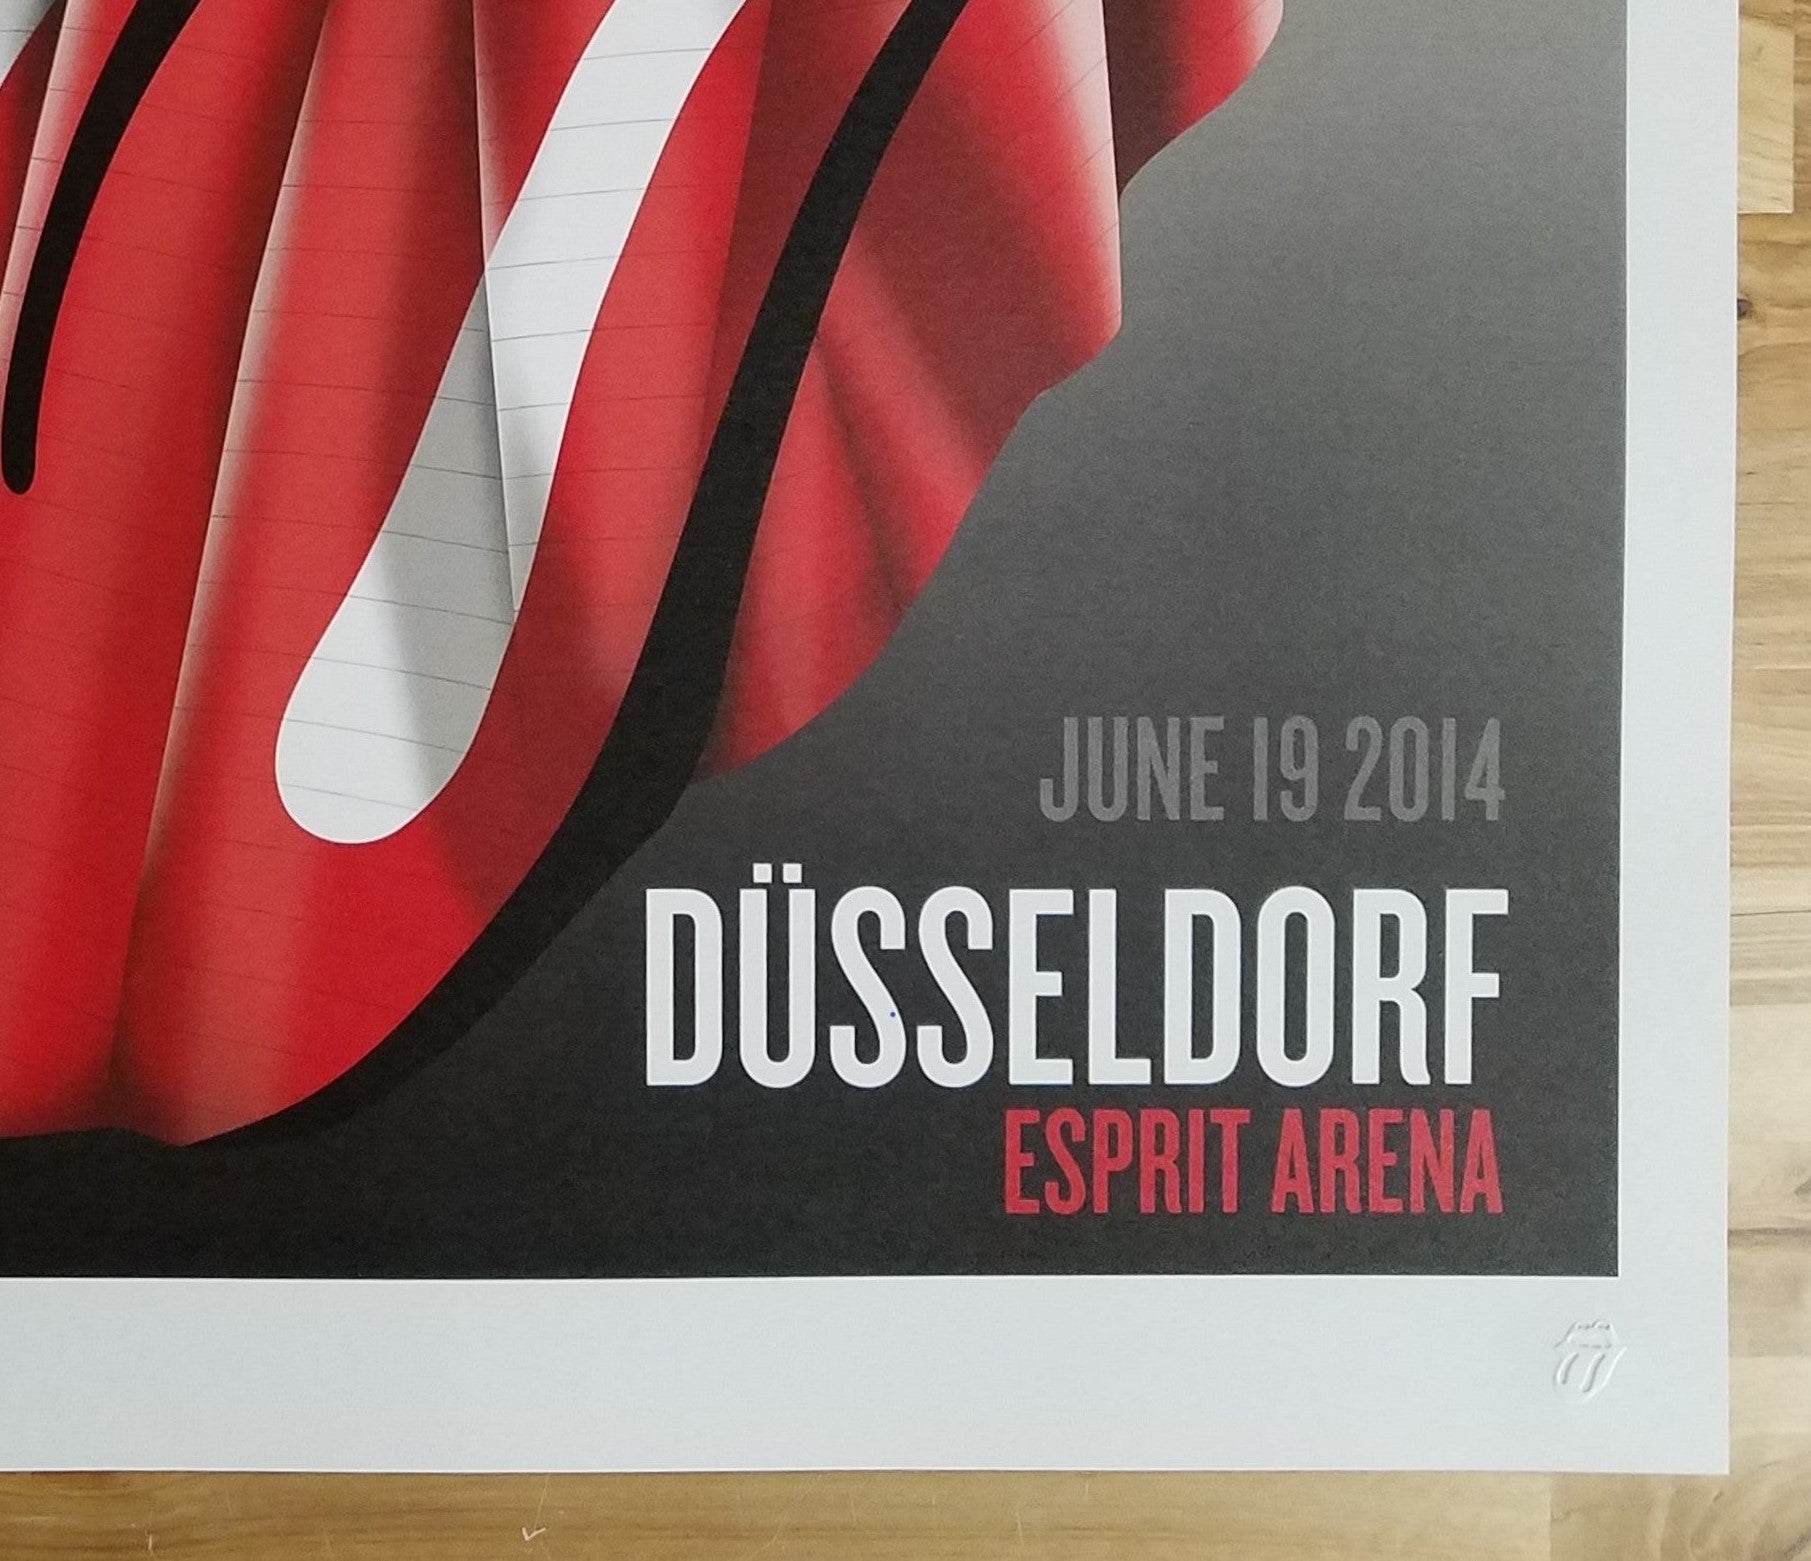 Title: Rolling Stones   Poster artist:   Edition:  xx/500  Type: Limited edition lithograph   Size: 17" x 23"  Location: Dusseldorf, Germany   Venue:  Esprit Arena   Notes:  1st edition, official poster hand numbered and embossed.  Official poster, Europe 14 On Fire Tour original from the show!